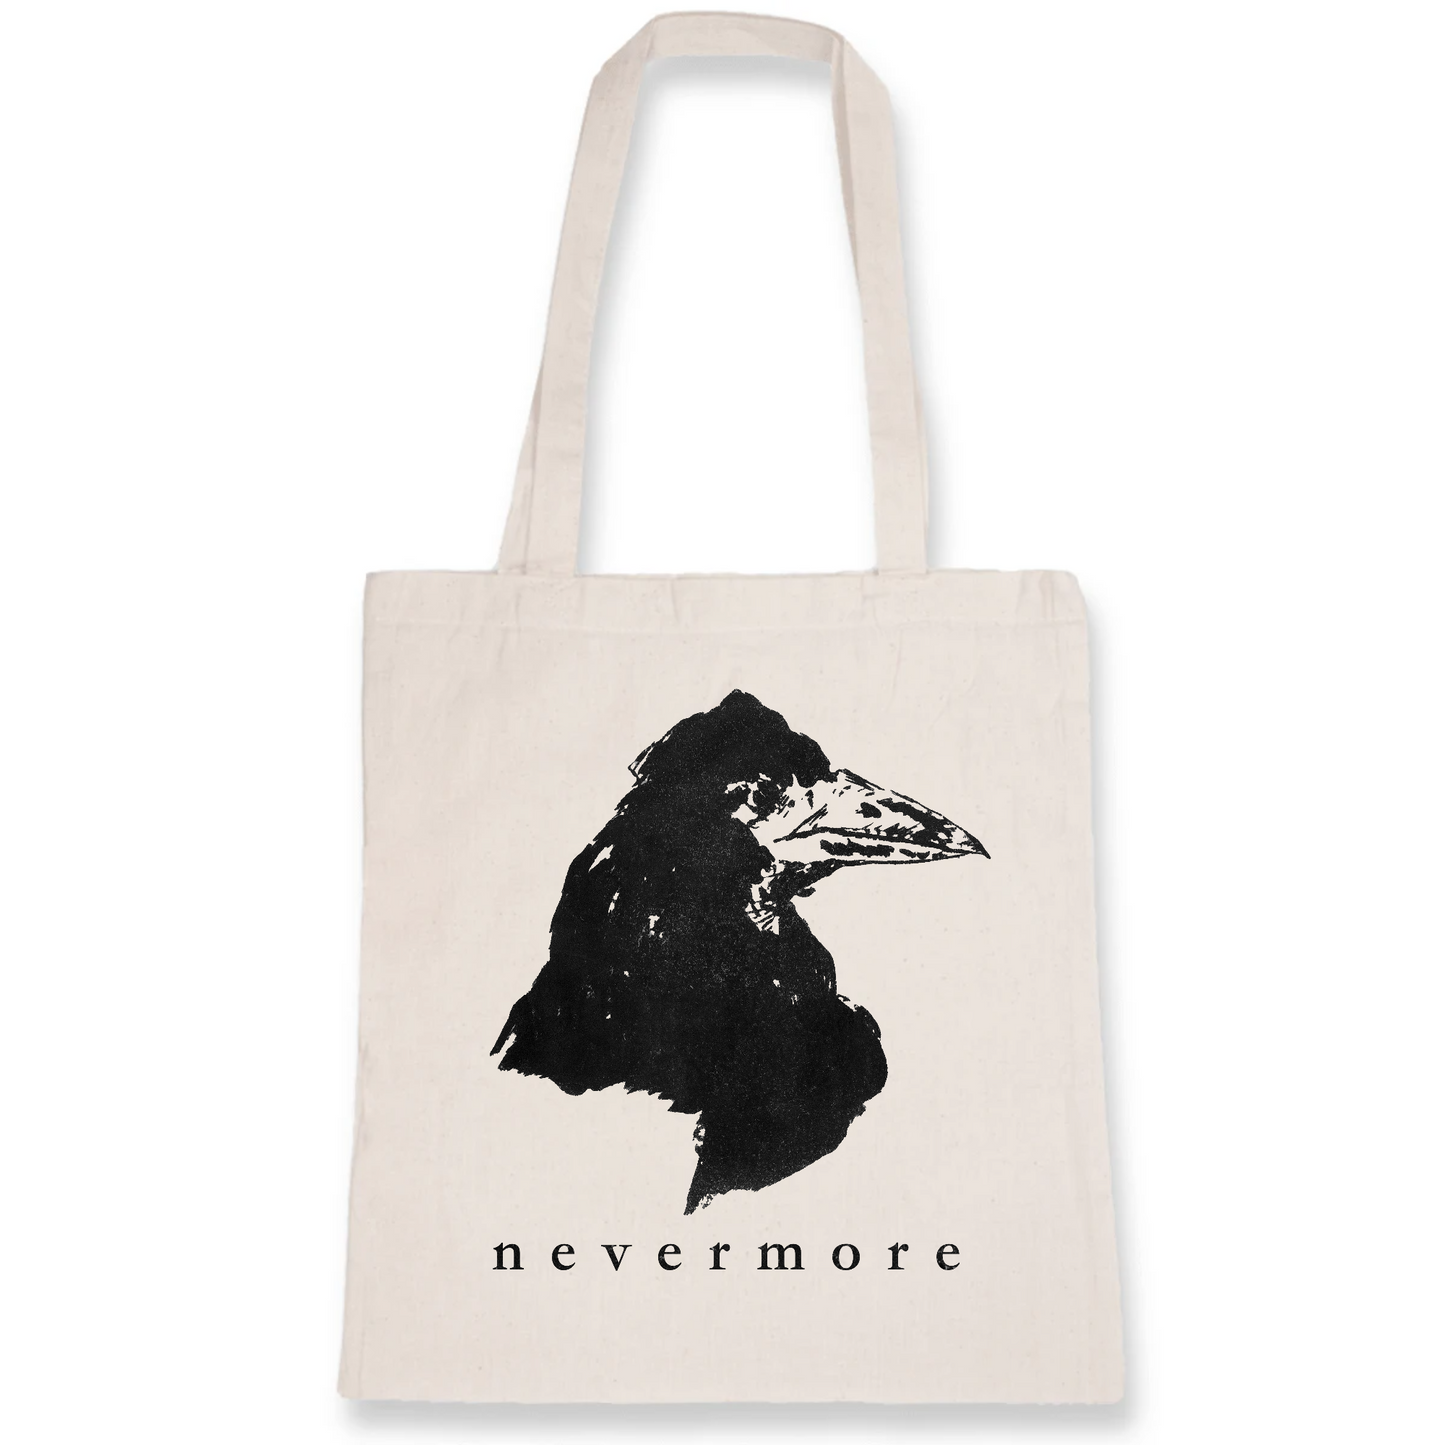 100% organic cotton tote bag featuring a design for the poster and cover for 'The Raven' by Édouard Manet - 1875.